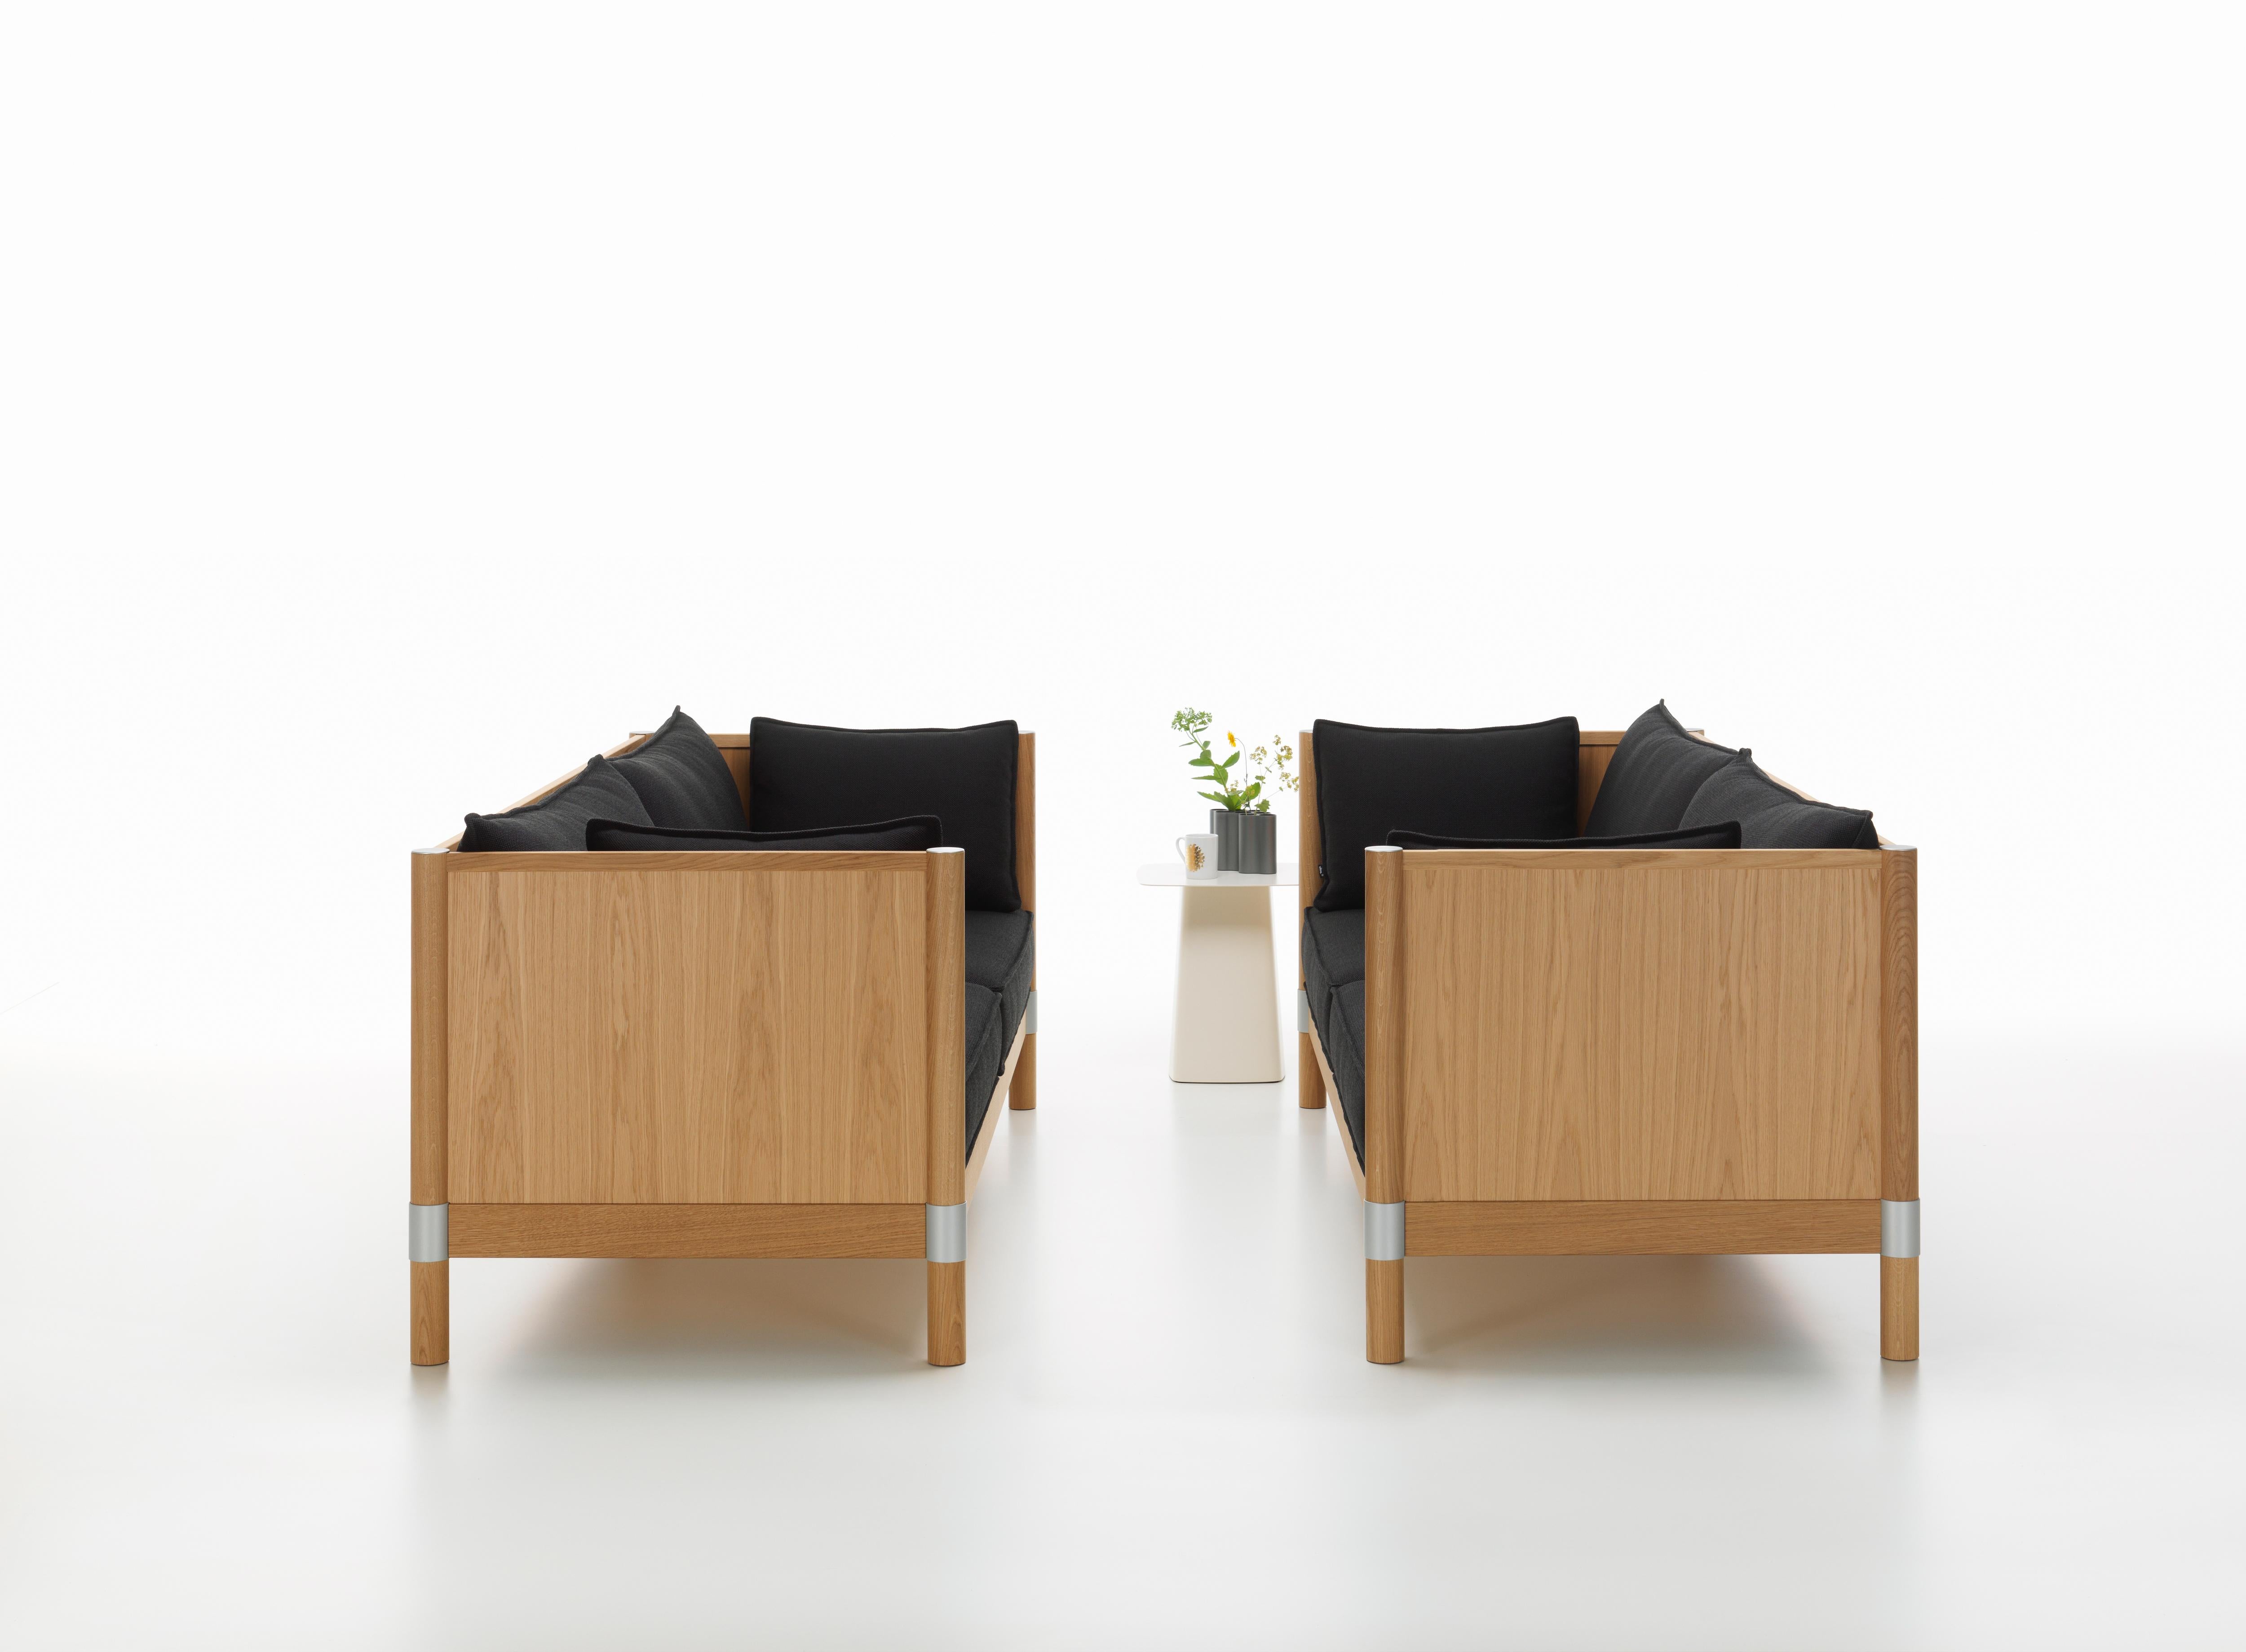 Vitra Cyl Sofa Wood in Black & Anthracite Credo by Ronan & Erwan Bouroullec (Polster) im Angebot